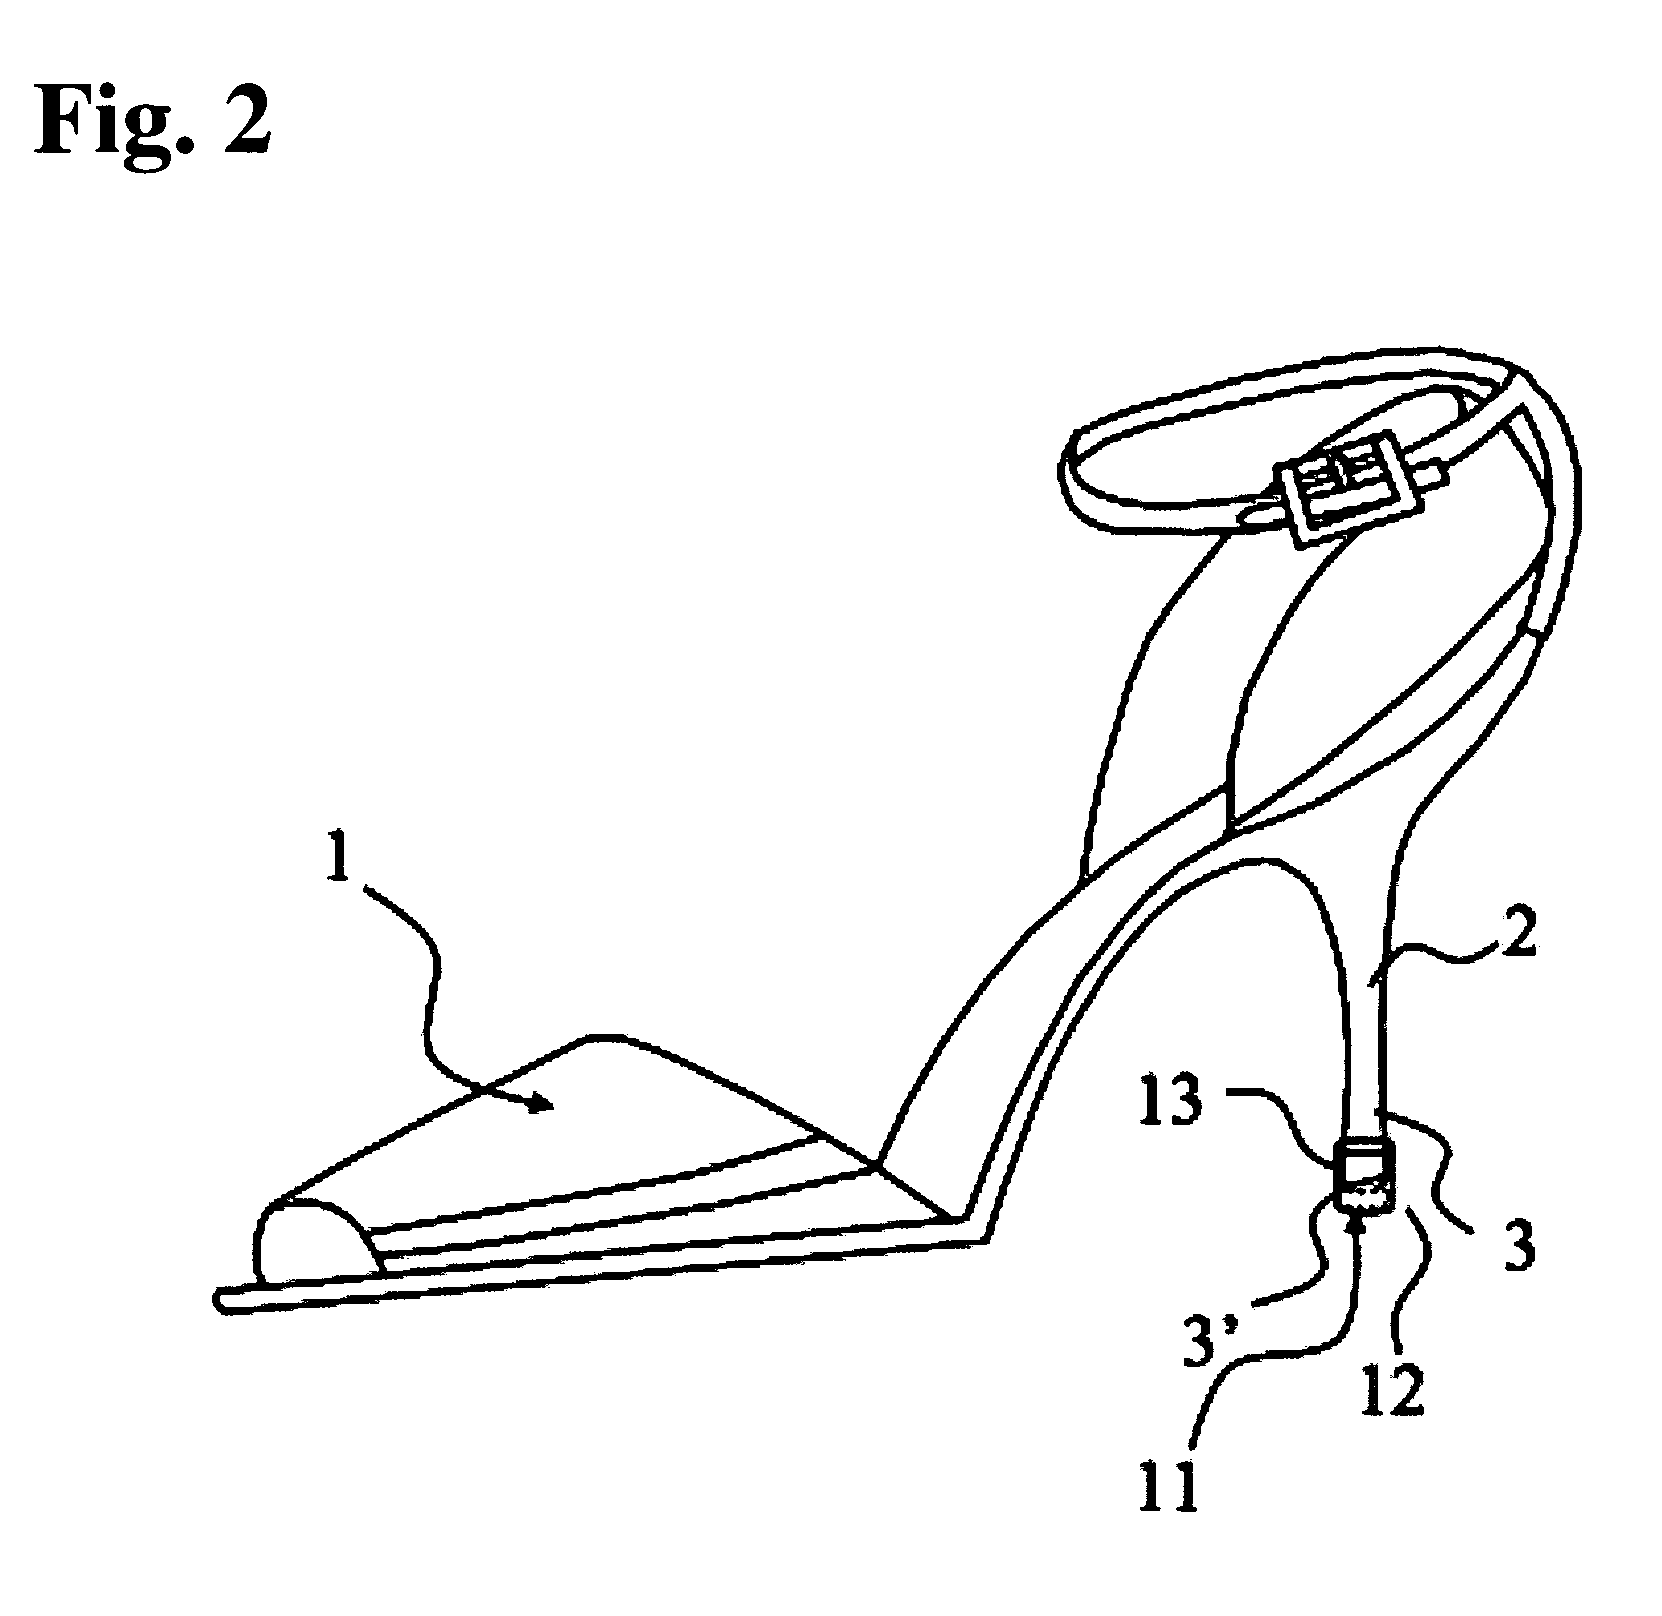 Shoe surface and heel repair/protective device